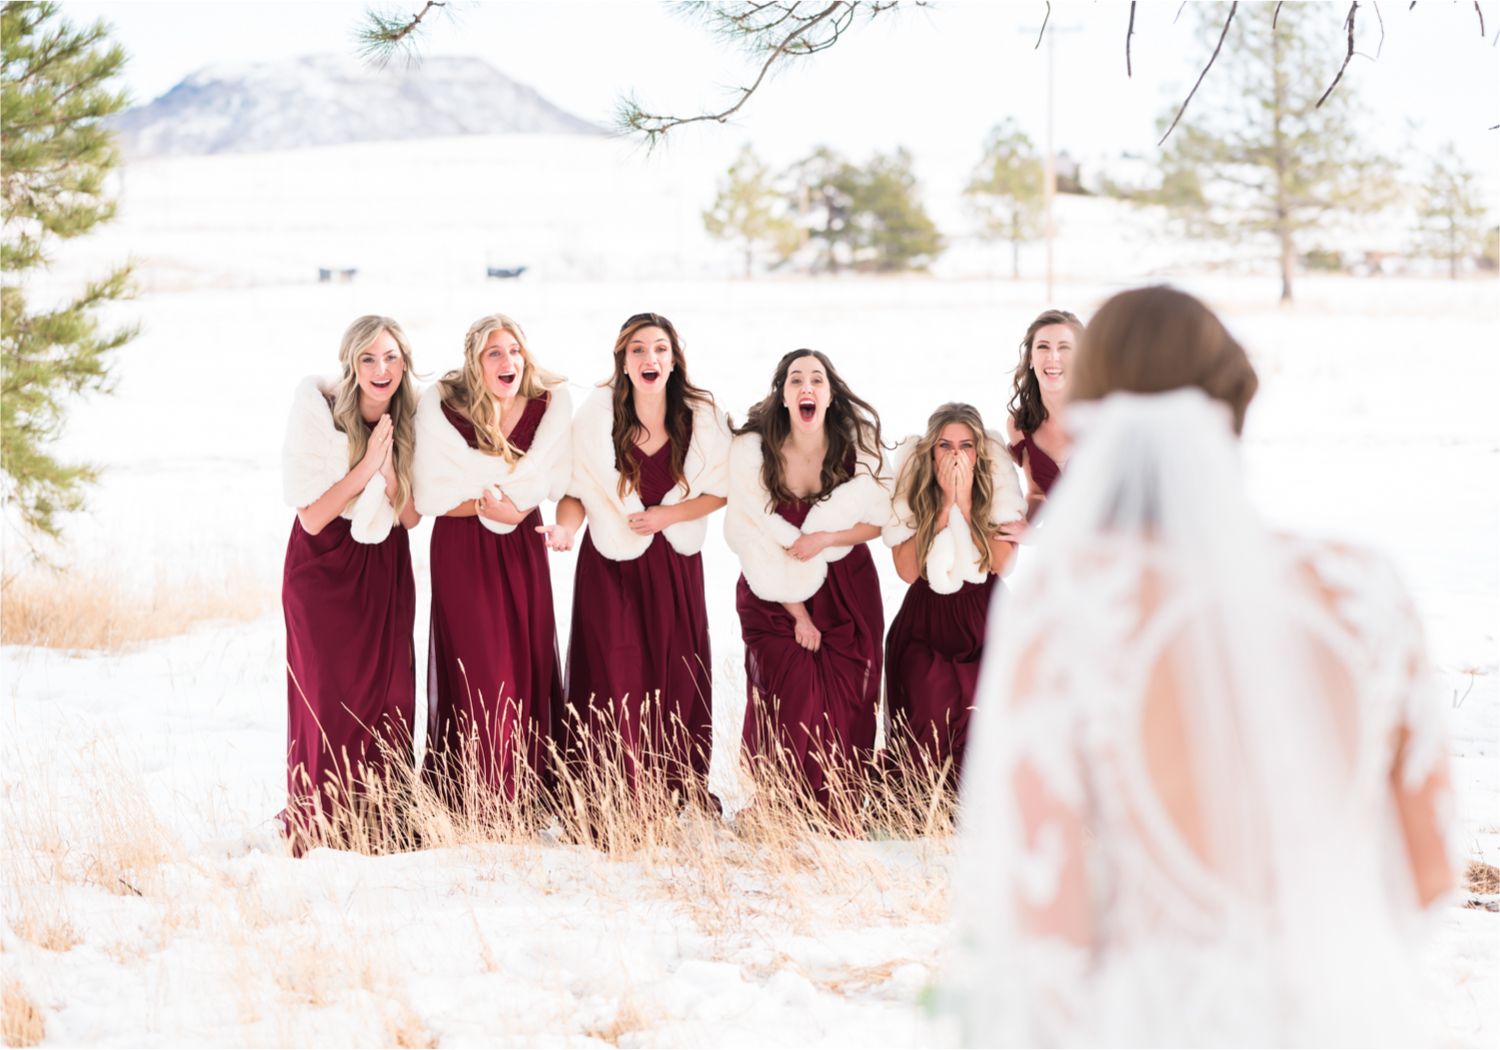 Winter Wonderland Wedding in Colorado Springs | Britni Girard Photography Colorado Wedding Photography and Film Team | Snow covered mountains and Christmas just a few days away | Annika + John's Nostalgic Winter Wedding | Bride's Dress iDream Bridal Essence of Australia | Air Force Academy | Bridesmaid First Look | Bridesmaid Dresses by Azazie